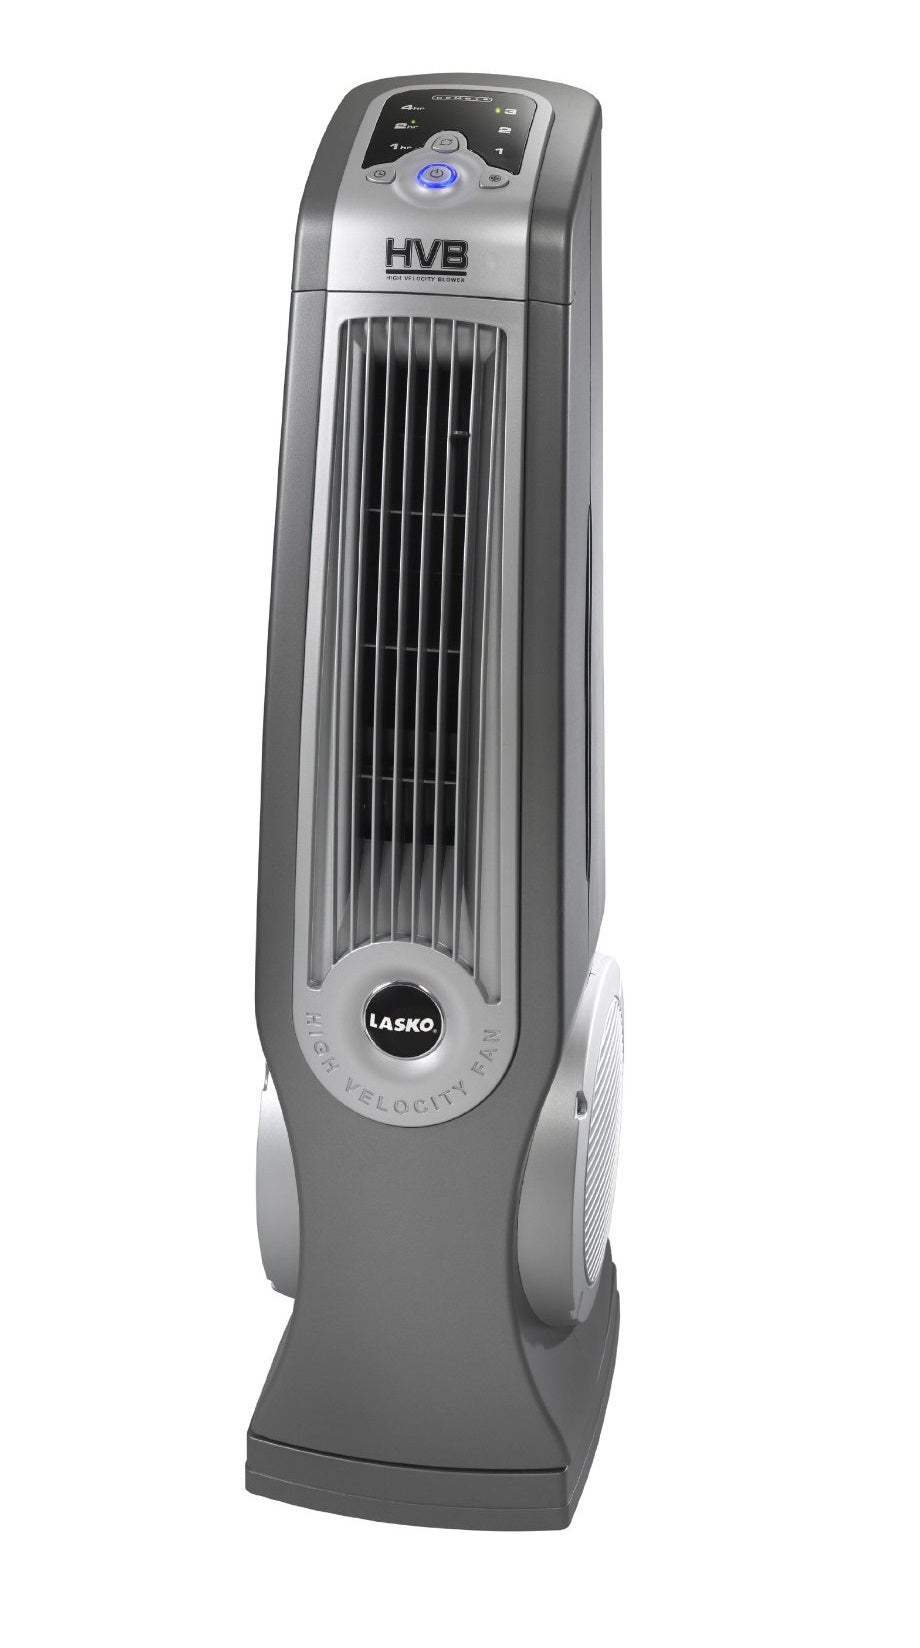 buy high velocity fans at cheap rate in bulk. wholesale & retail ventilation & exhaust fans store.